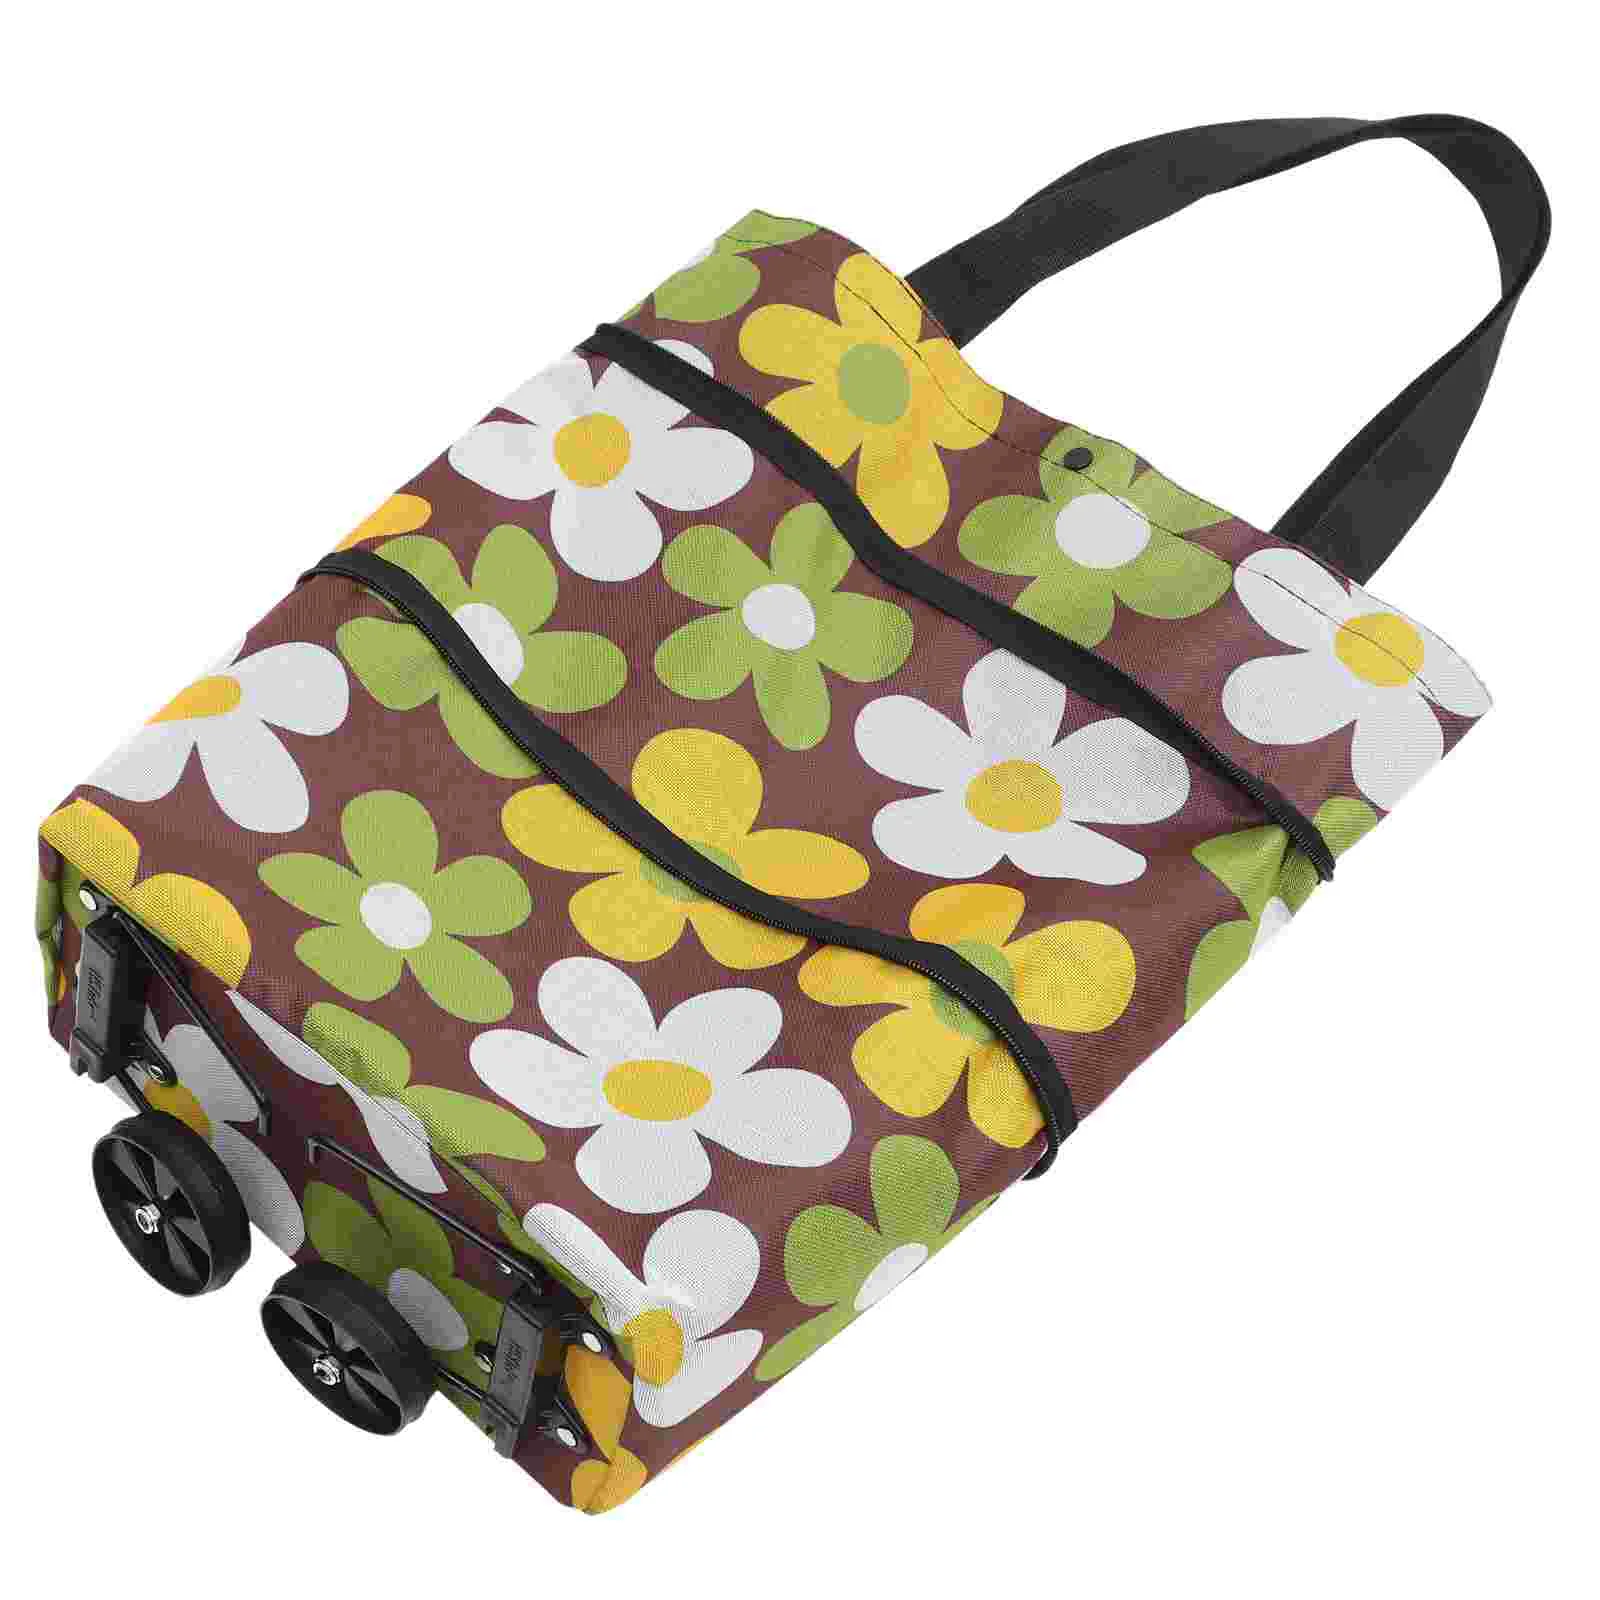 

Shopping Bag Wheels Folding Grocery Cart Bag Reusable Portable Collapsible Trolley Bags Hand Pulling Utility Collapsible